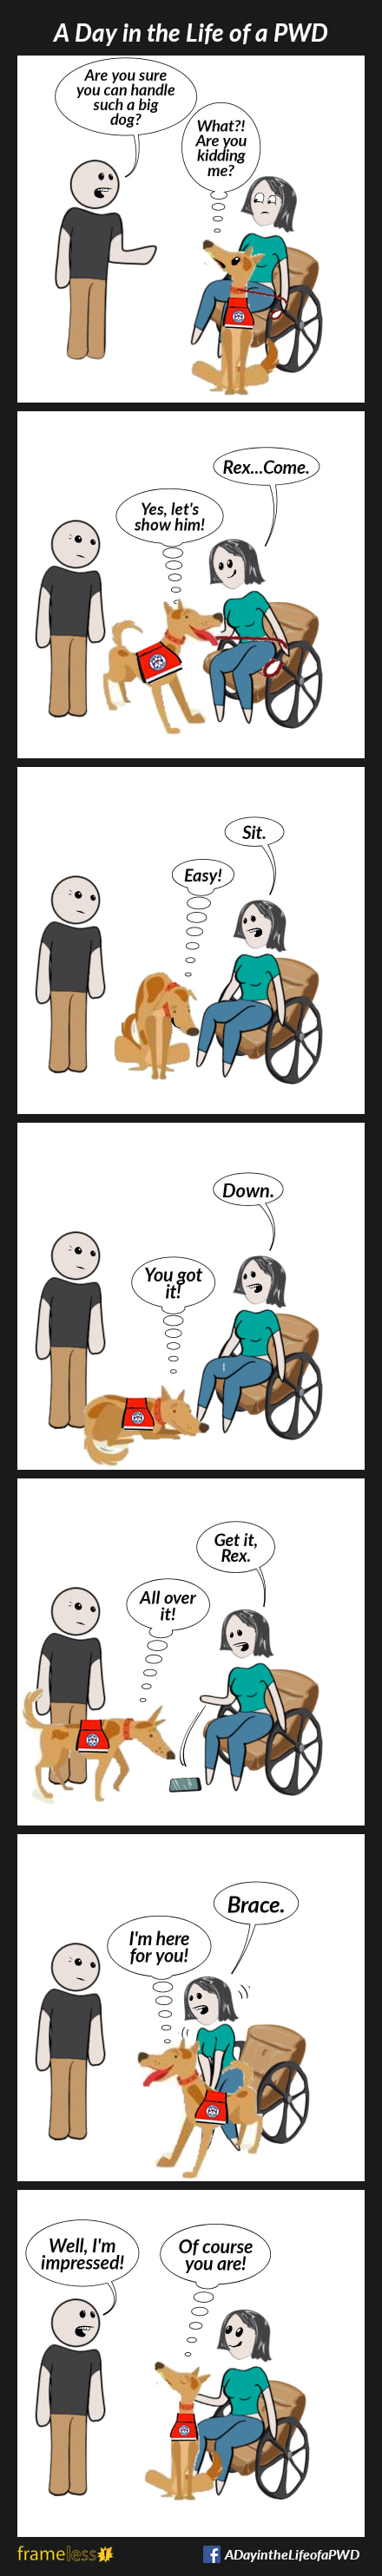 COMIC STRIP 
A Day in the Life of a PWD (Person With a Disability) 

Frame 1:
A woman in a wheelchair is talking to a man. Her service dog, Rex, sits at her feet.
MAN: Are you sure you can handle such a big dog?
REX (thinking): What??! Are you kidding me?

Frame 2:
WOMAN: Rex...Come.
REX (jumping to attention): Yes, let's show him!

Frame 3:
WOMAN: Sit.
REX (sitting): Easy!

Frame 4:
WOMAN: Down.
REX (laying down): You got it!

Frame 5:
WOMAN (dropping her phone on the ground): Get it, Rex.
REX (retrieving the phone): All over it!

Frame 6:
WOMAN: Brace.
Rex stands next to her, so she can hold onto him as she stands up.
REX: I'm here for you!

Frame 7:
MAN: Well, I'm impressed!
REX (proudly): Of course you are!
